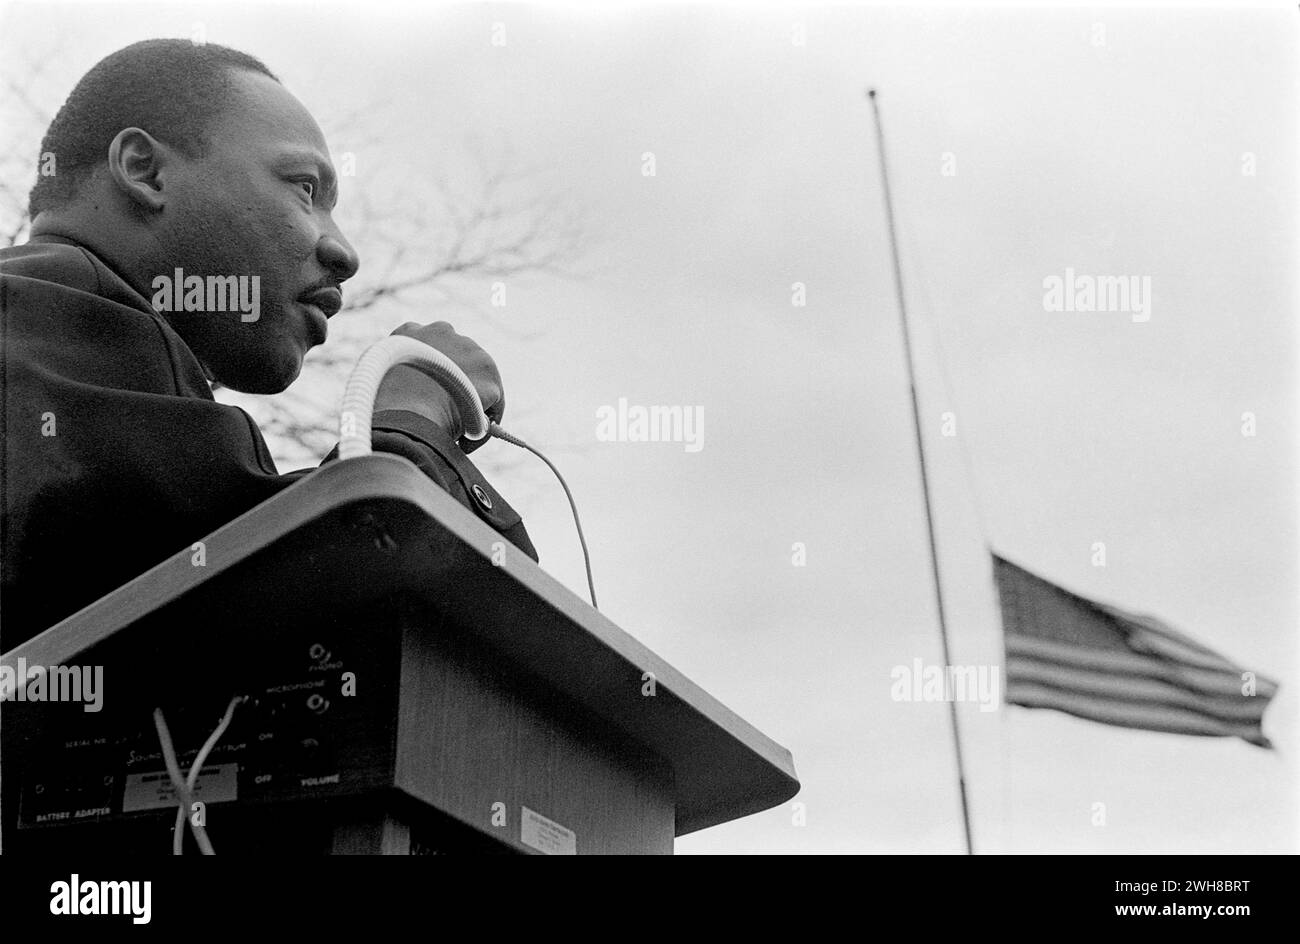 Dr King Speaking During a Peaceful Civil Rights Protest in the 1960s in Chicago Stock Photo